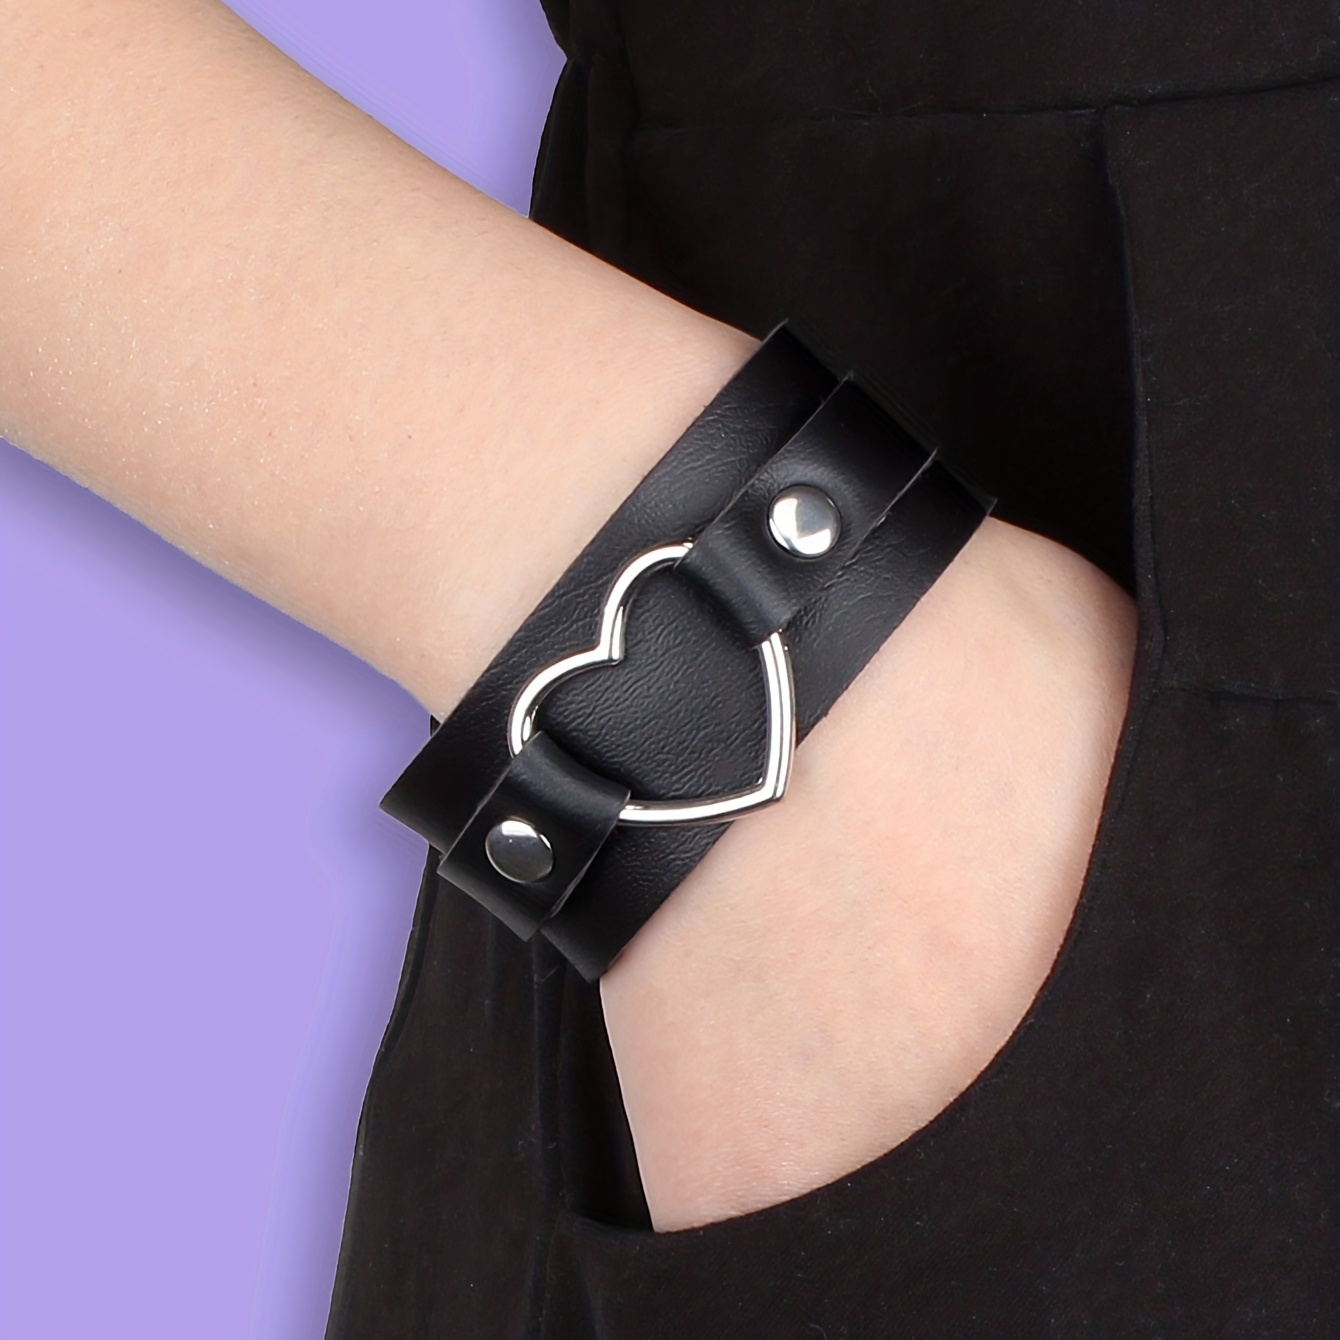 

Love Heart Black Pu Leather Bracelet Punk Style Hand Jewelry Accessory Suitable For Daily Wear